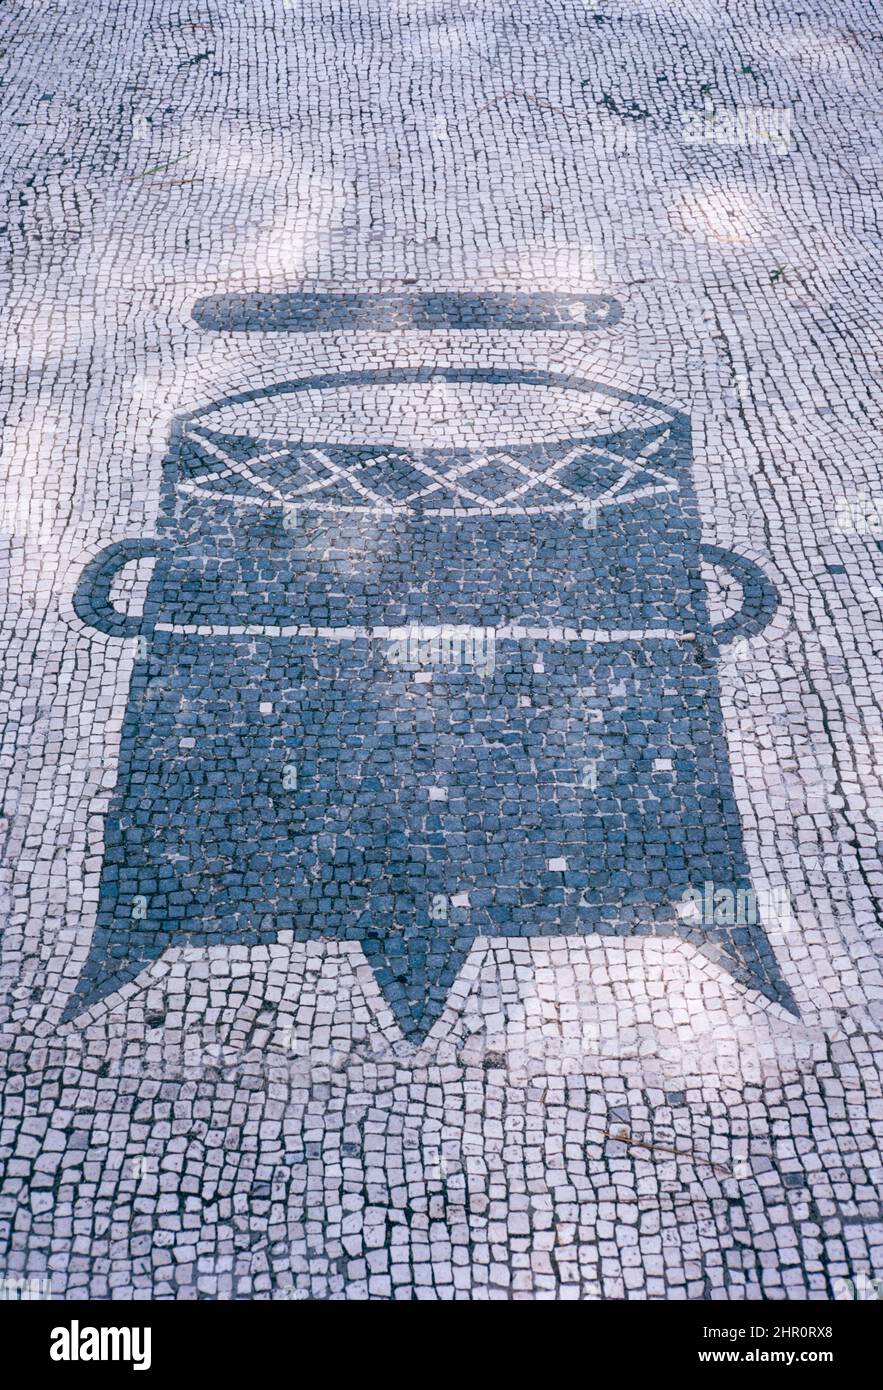 Ostia Antica - large archaeological site in progress, location of the harbour city of ancient Rome.  Piazzale delle Corporazioni (Square of the Corporations) mosaic.  Archival scan from a slide. April 1970. Stock Photo